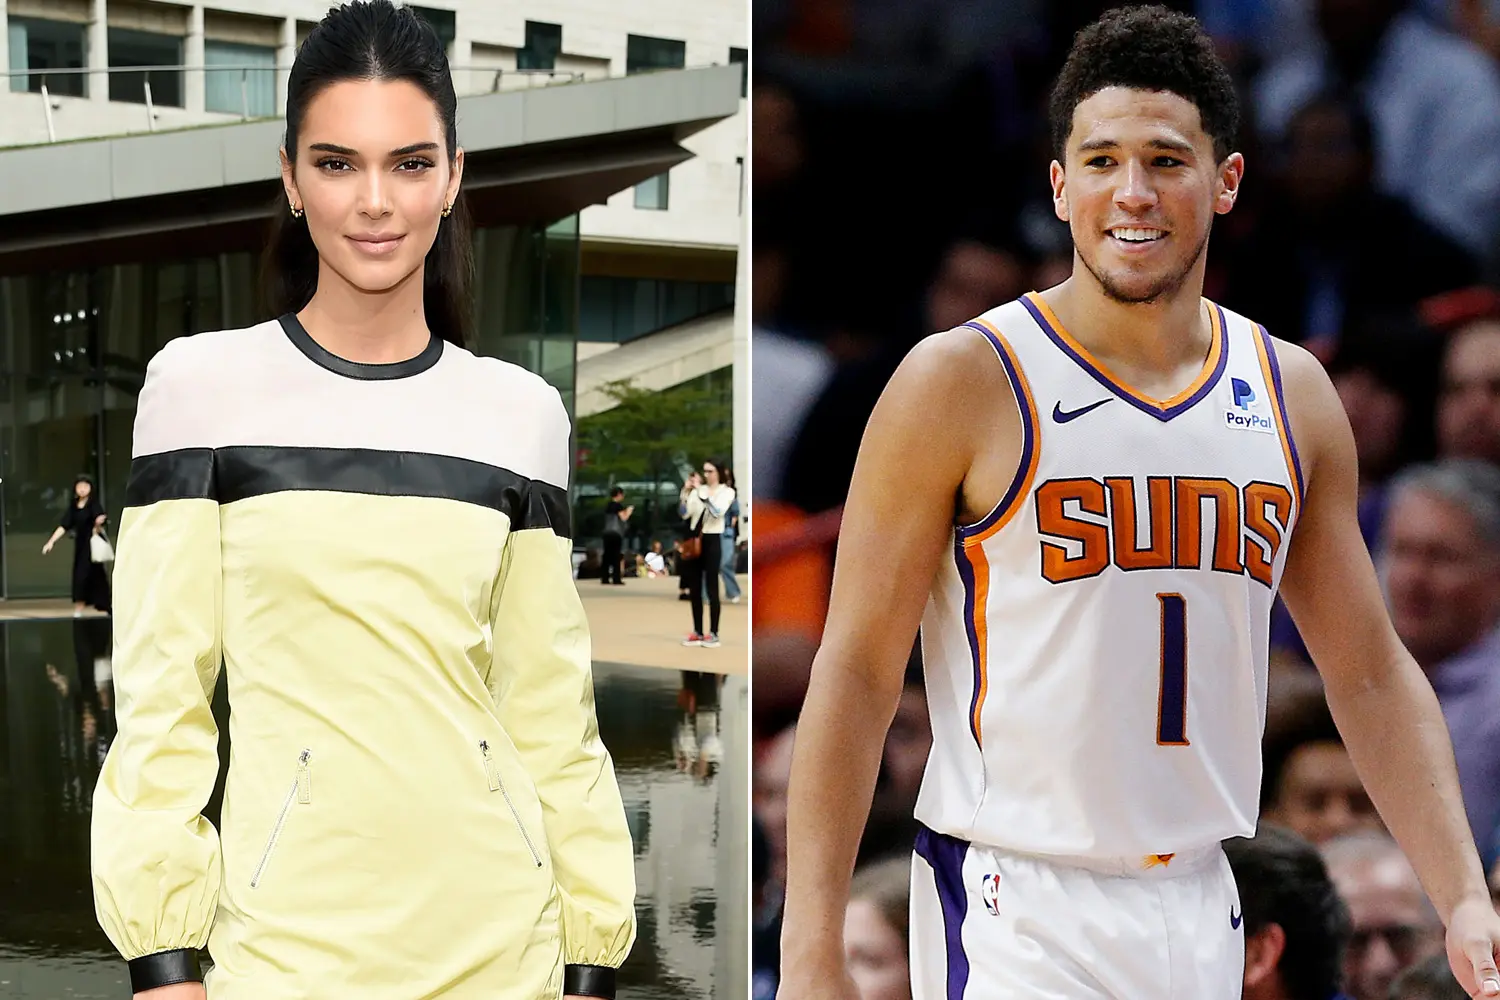 NBA Star Devin Booker's Buzz: Is Model Christina Nadin His New Beau? Inside Their Rumored Romance